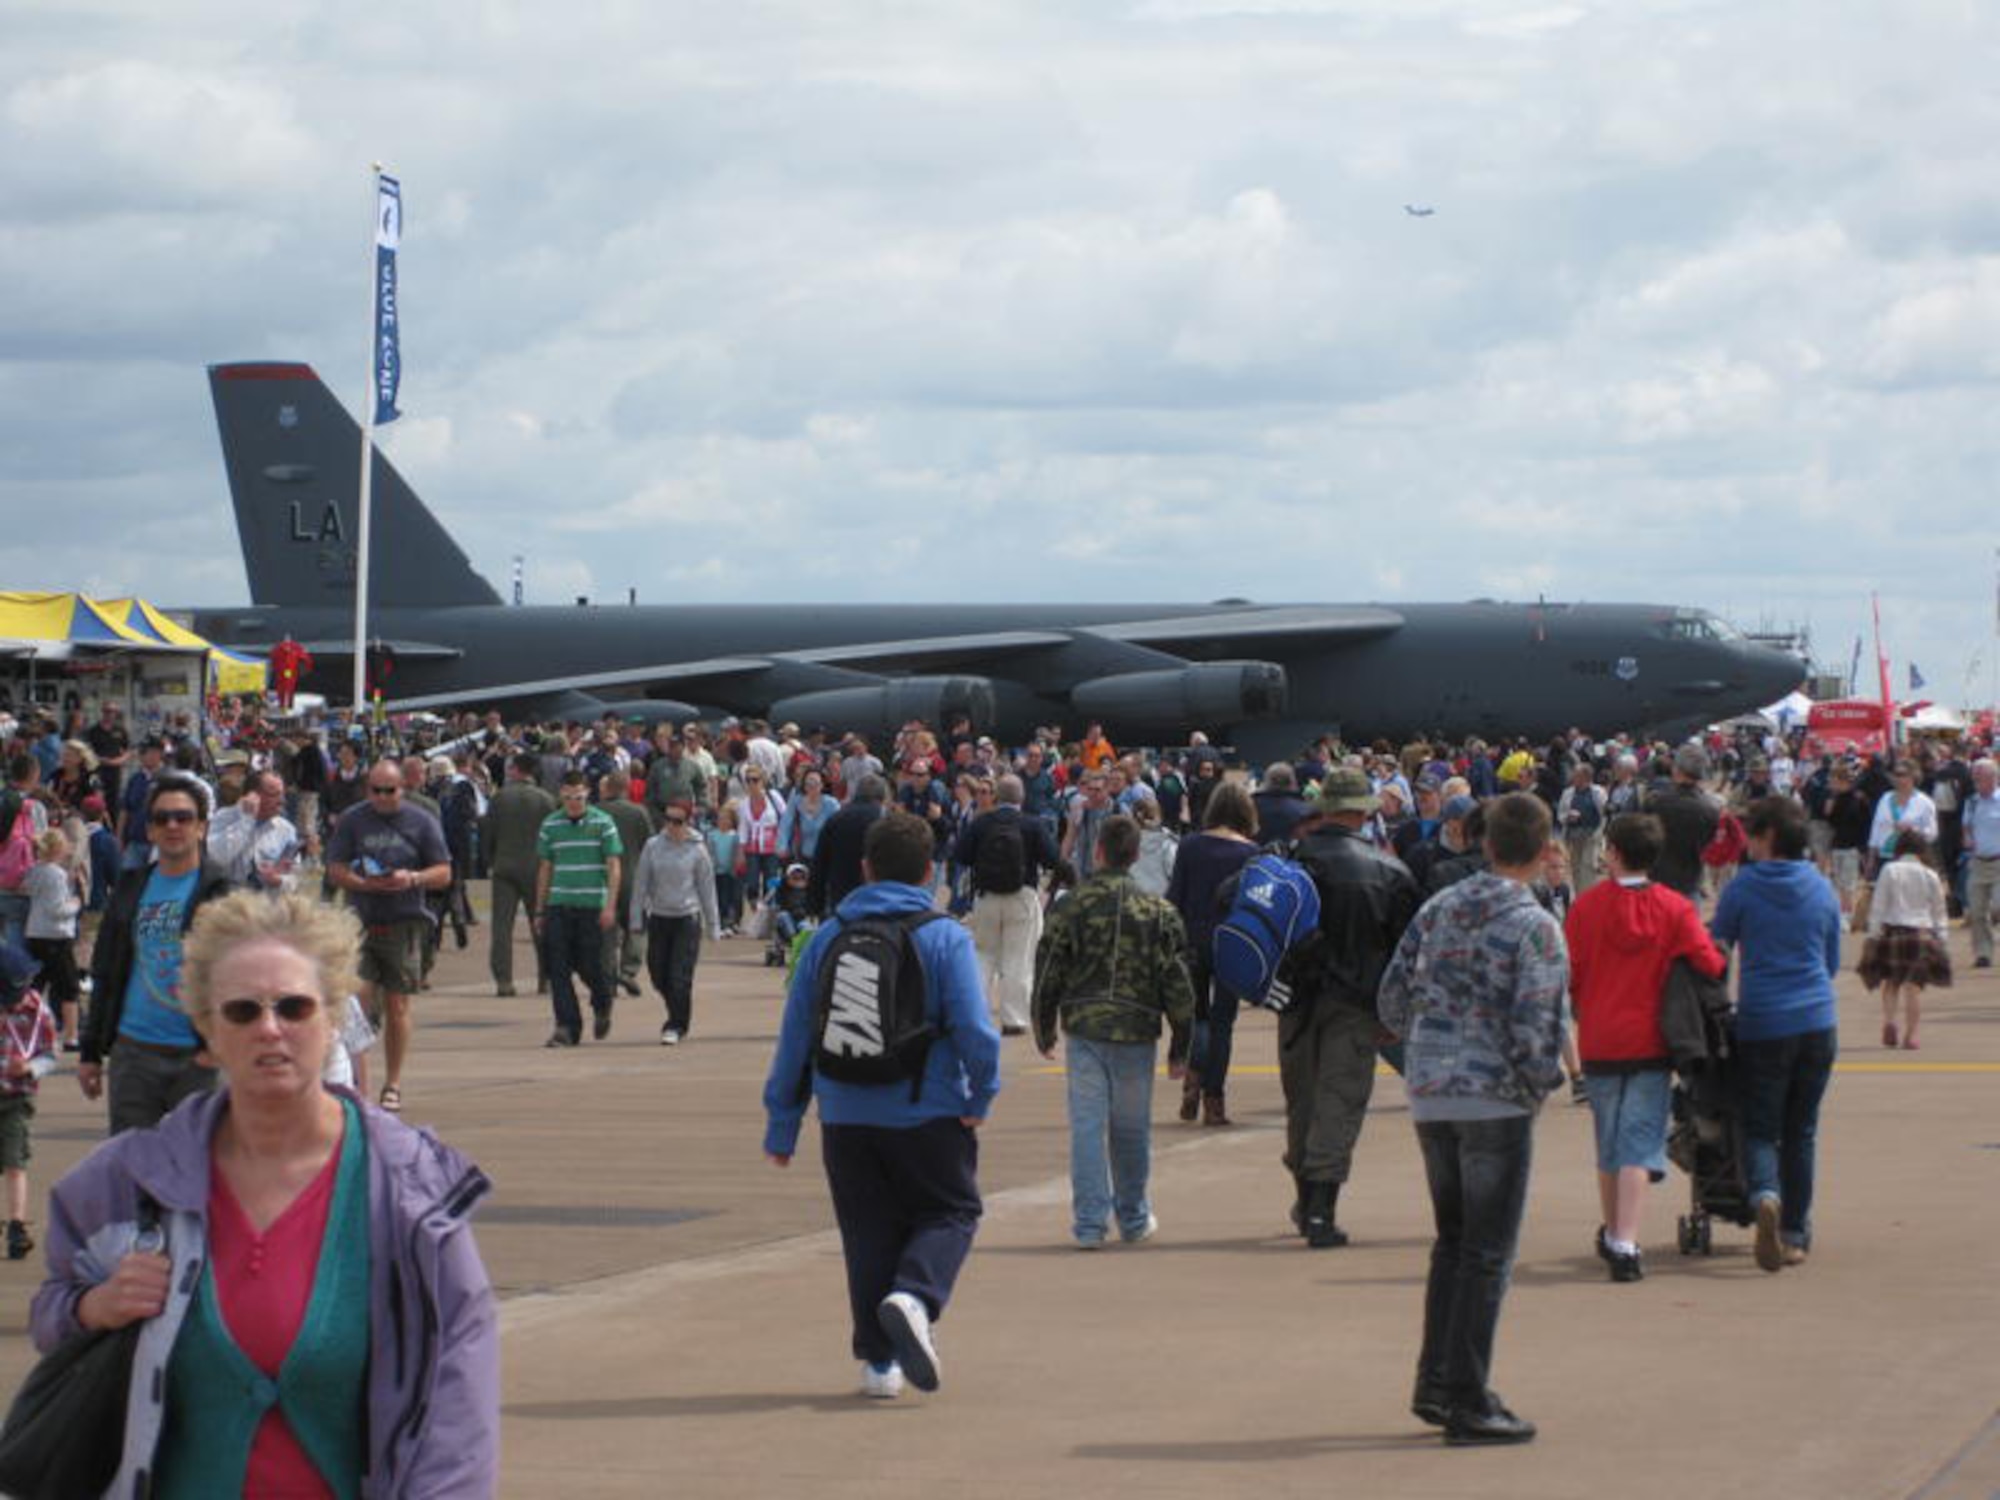 A U.S. Air Force B-52 Stratofortress based out of Barksdale Air Force Base, La., participates at the Royal International Air Tattoo July 17, 2010, at RAF Fairford, United Kingdom. RIAT is held annually and boast itself as "the world's largest military airshow." (U.S. Air Force photo/Chief Master Sgt. Greg Wade)